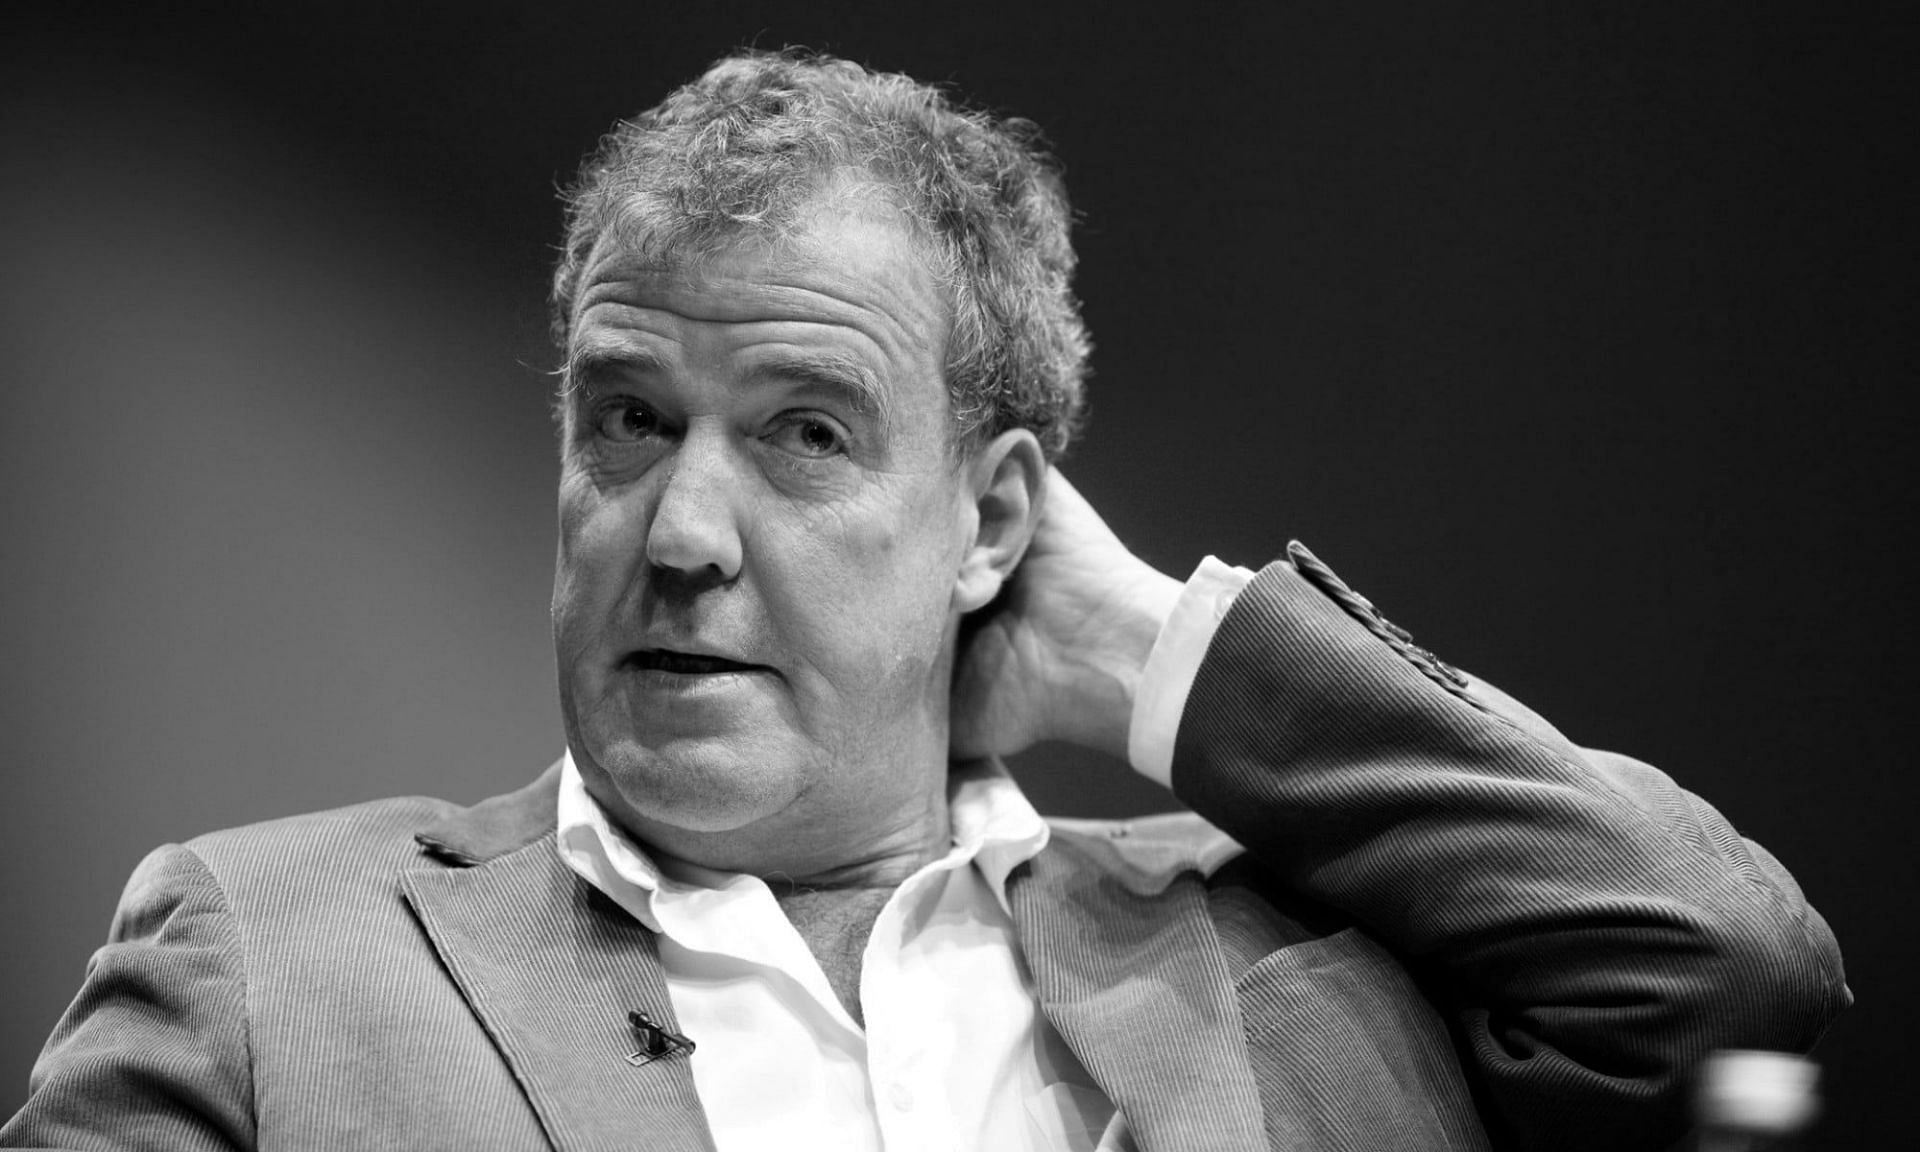 Jeremy Clarkson slammed the current state of affairs in F1